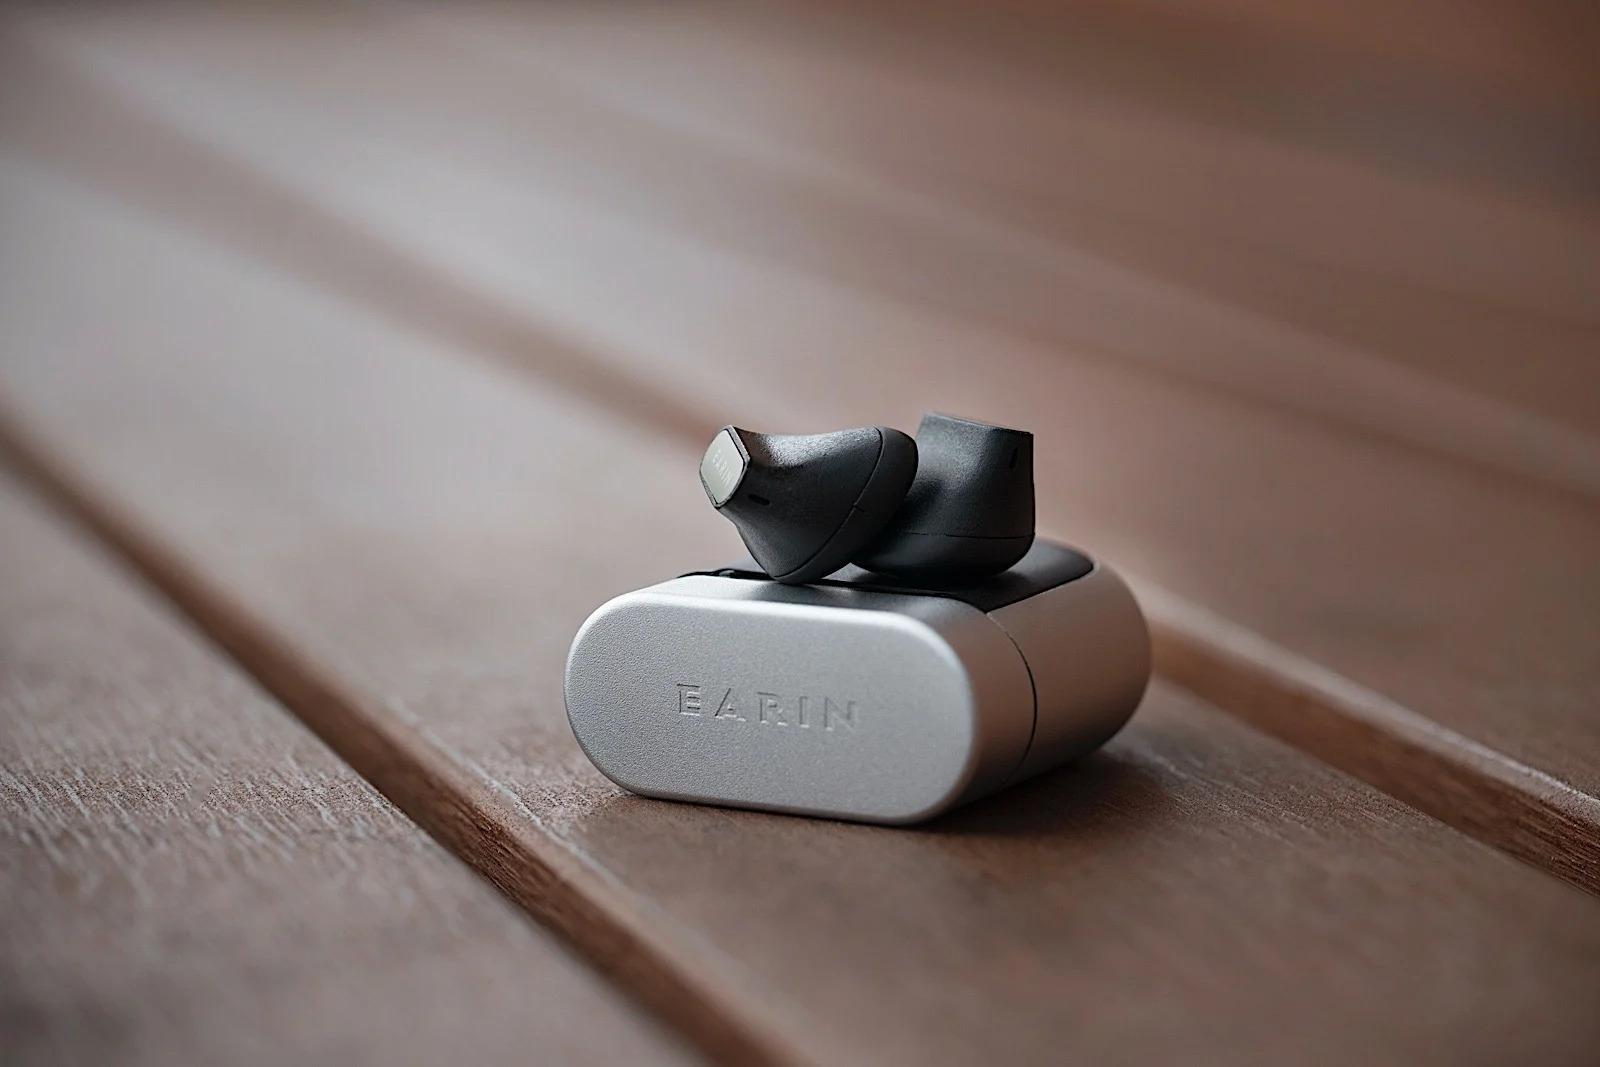 Earin's A-3 true wireless earbuds have an open design with no ear 